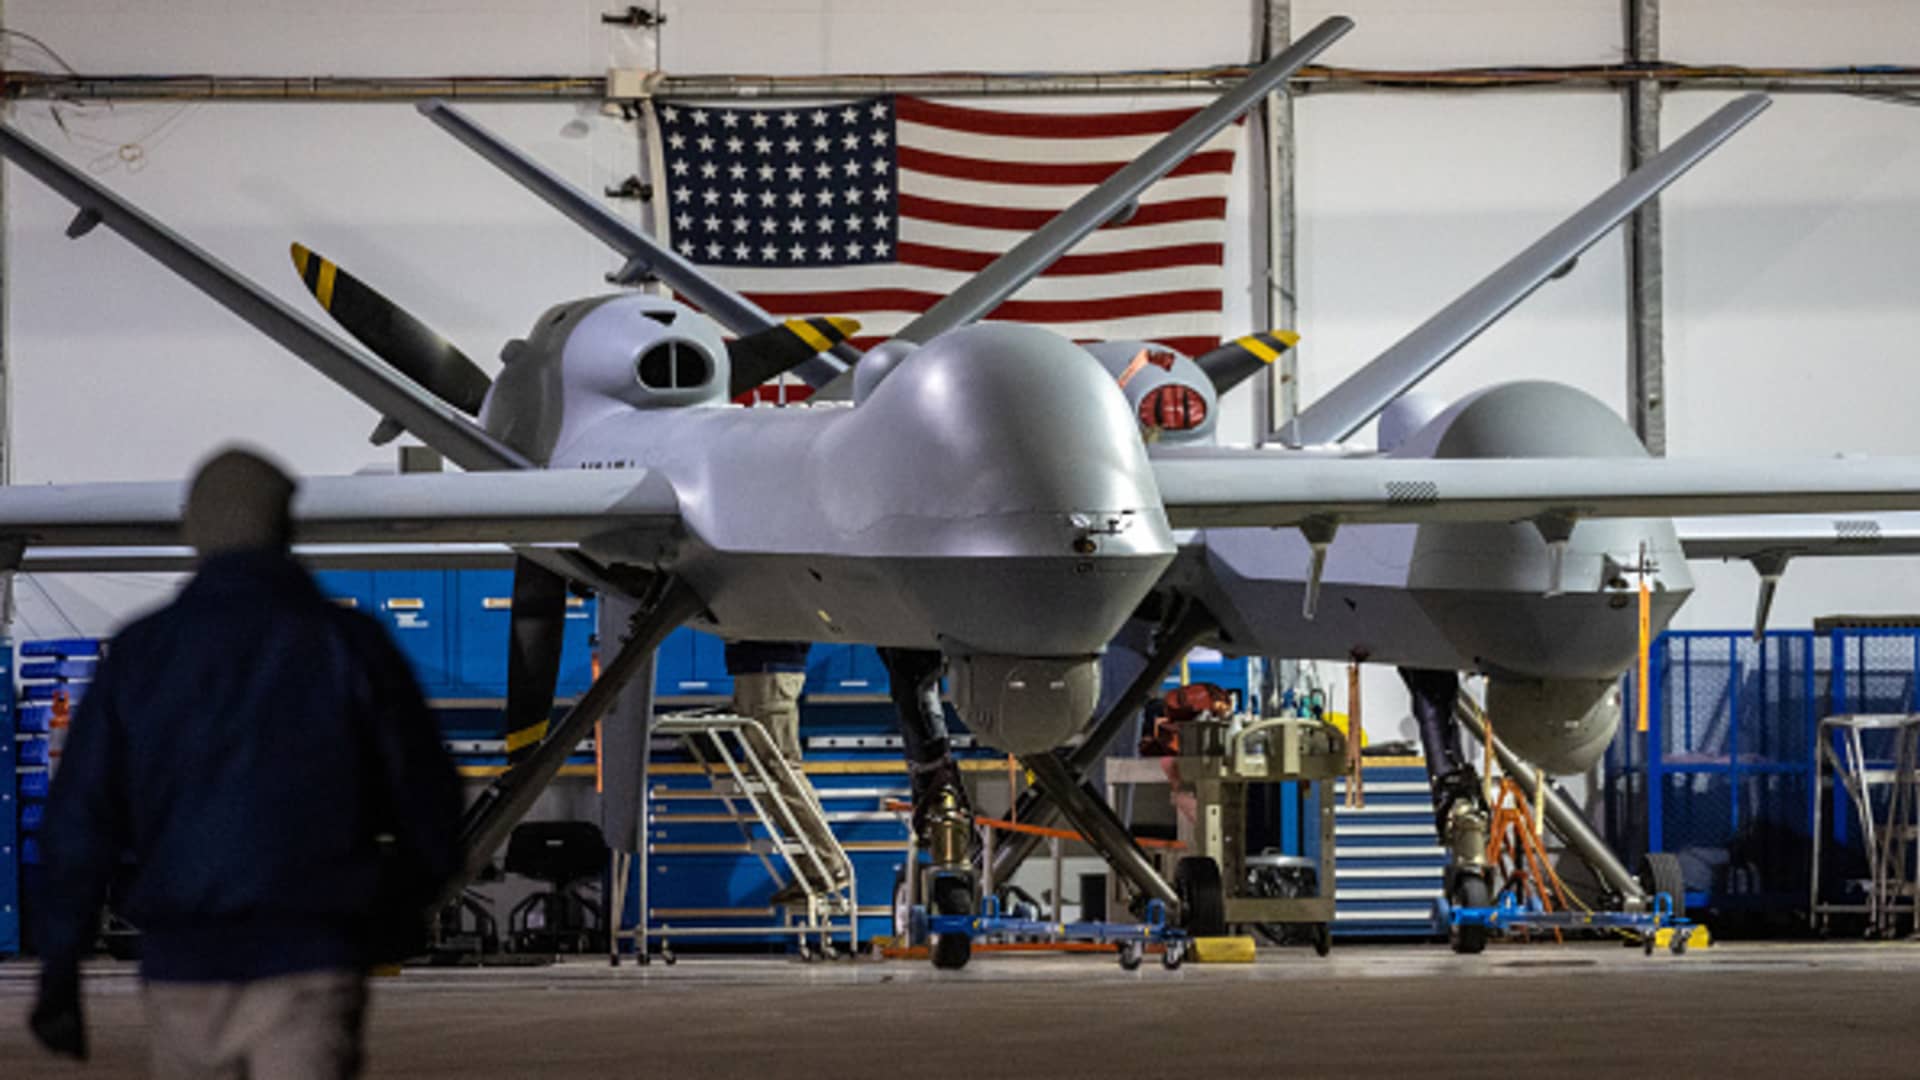 An MQ-9 Reaper drone similar to the one that was involved in an encounter with Russian fighter jets over the Black Sea.